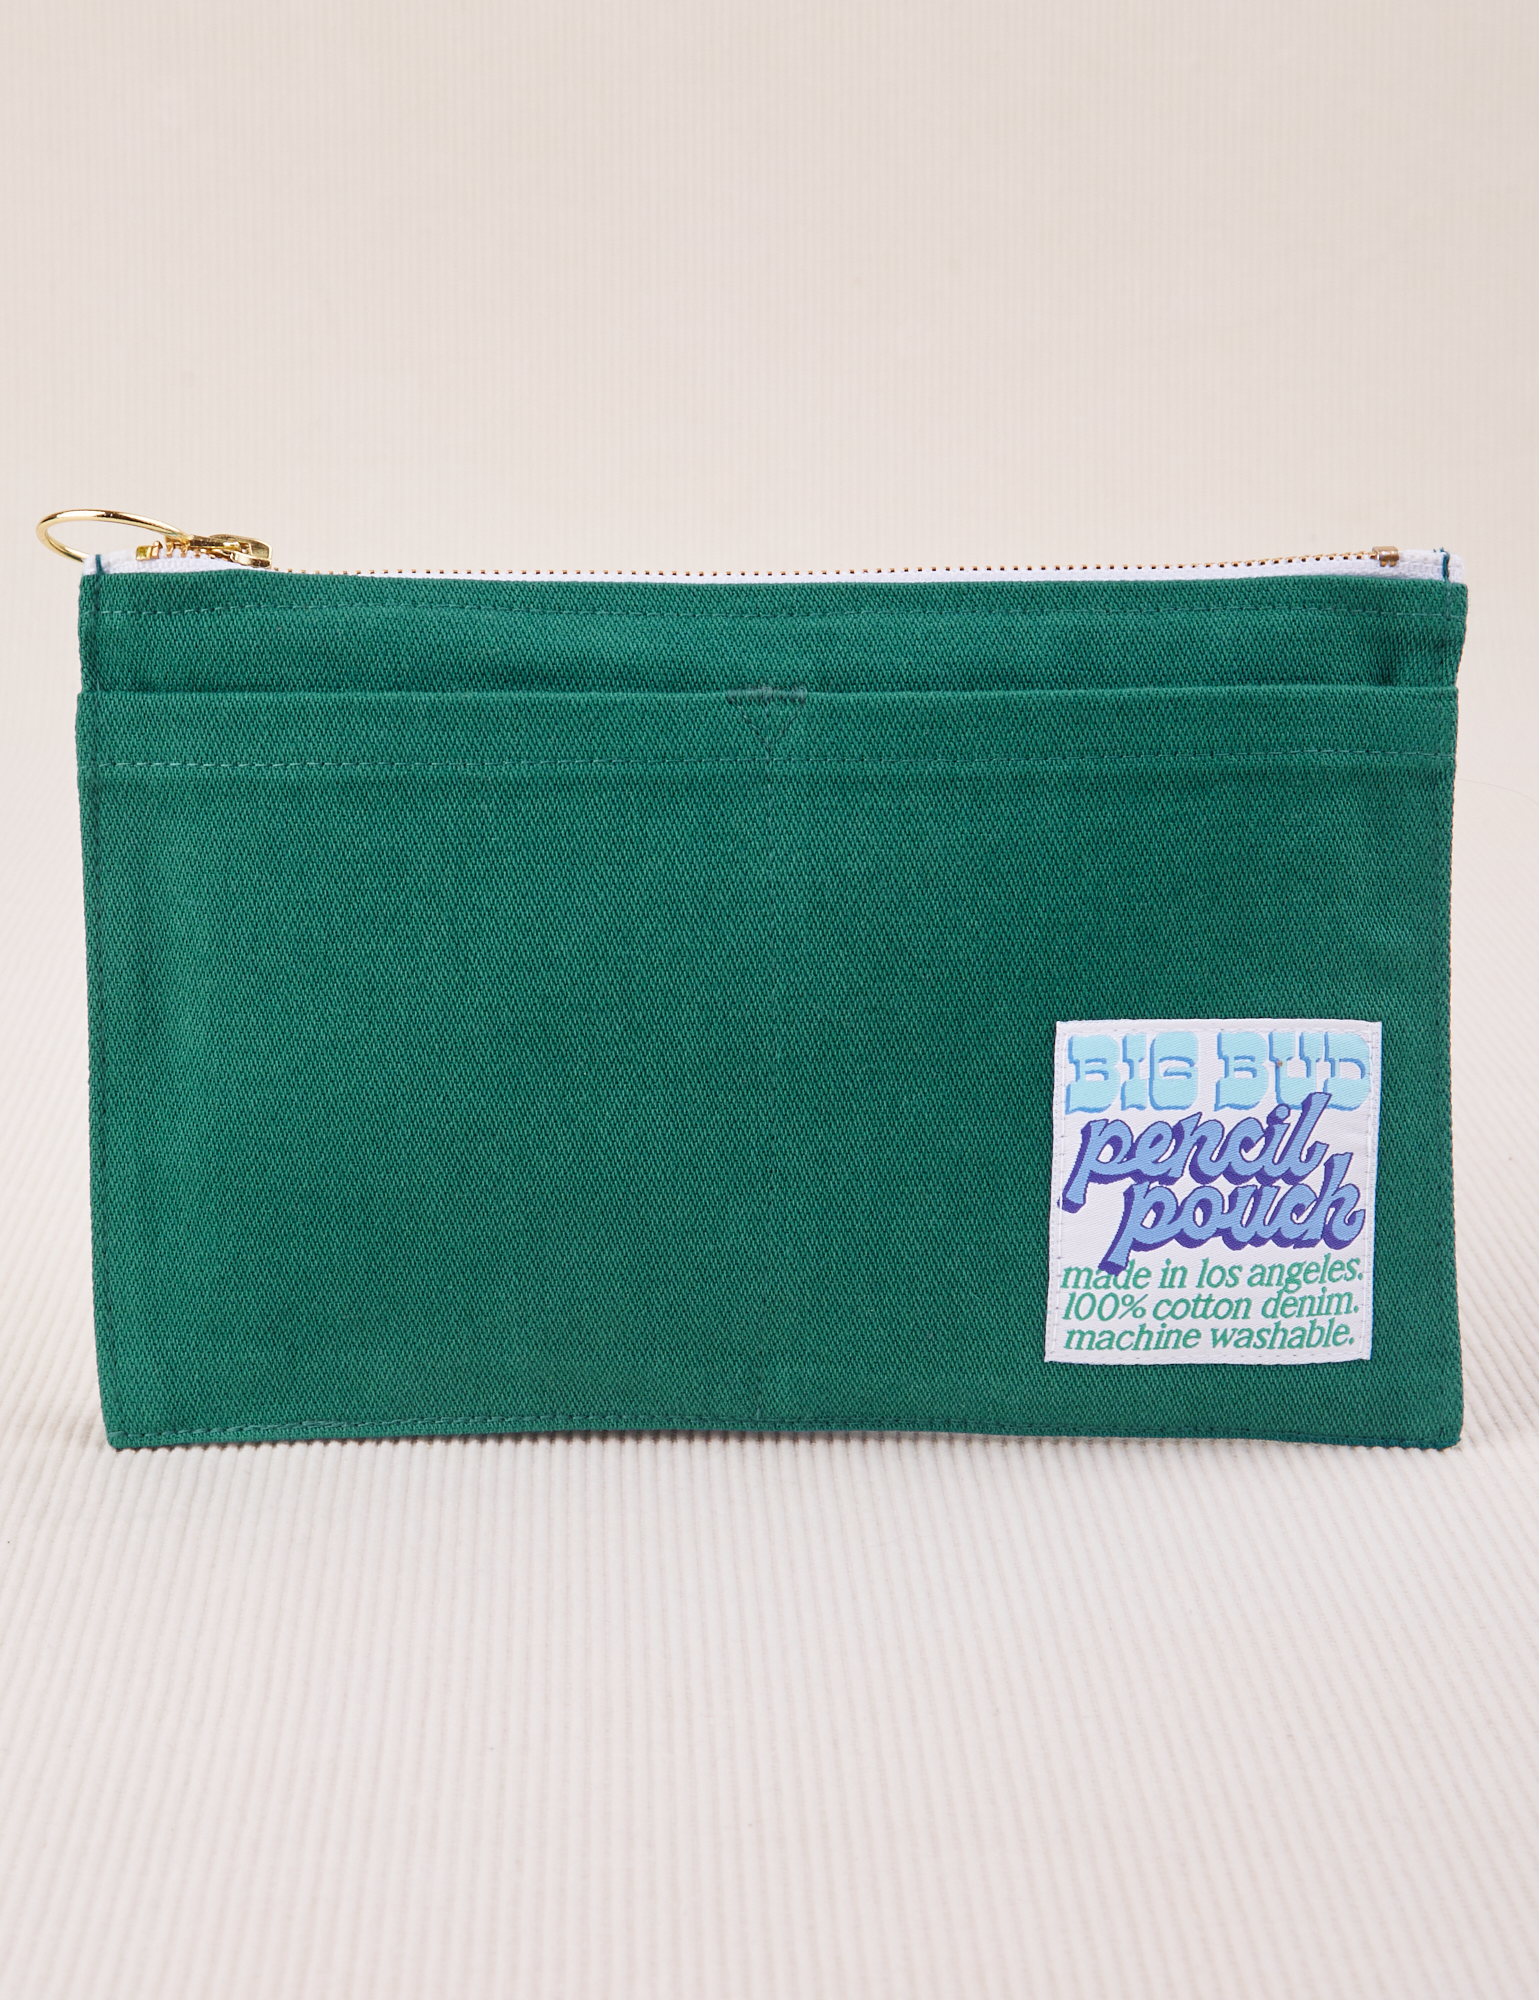 Pencil Pouch in Hunter Green